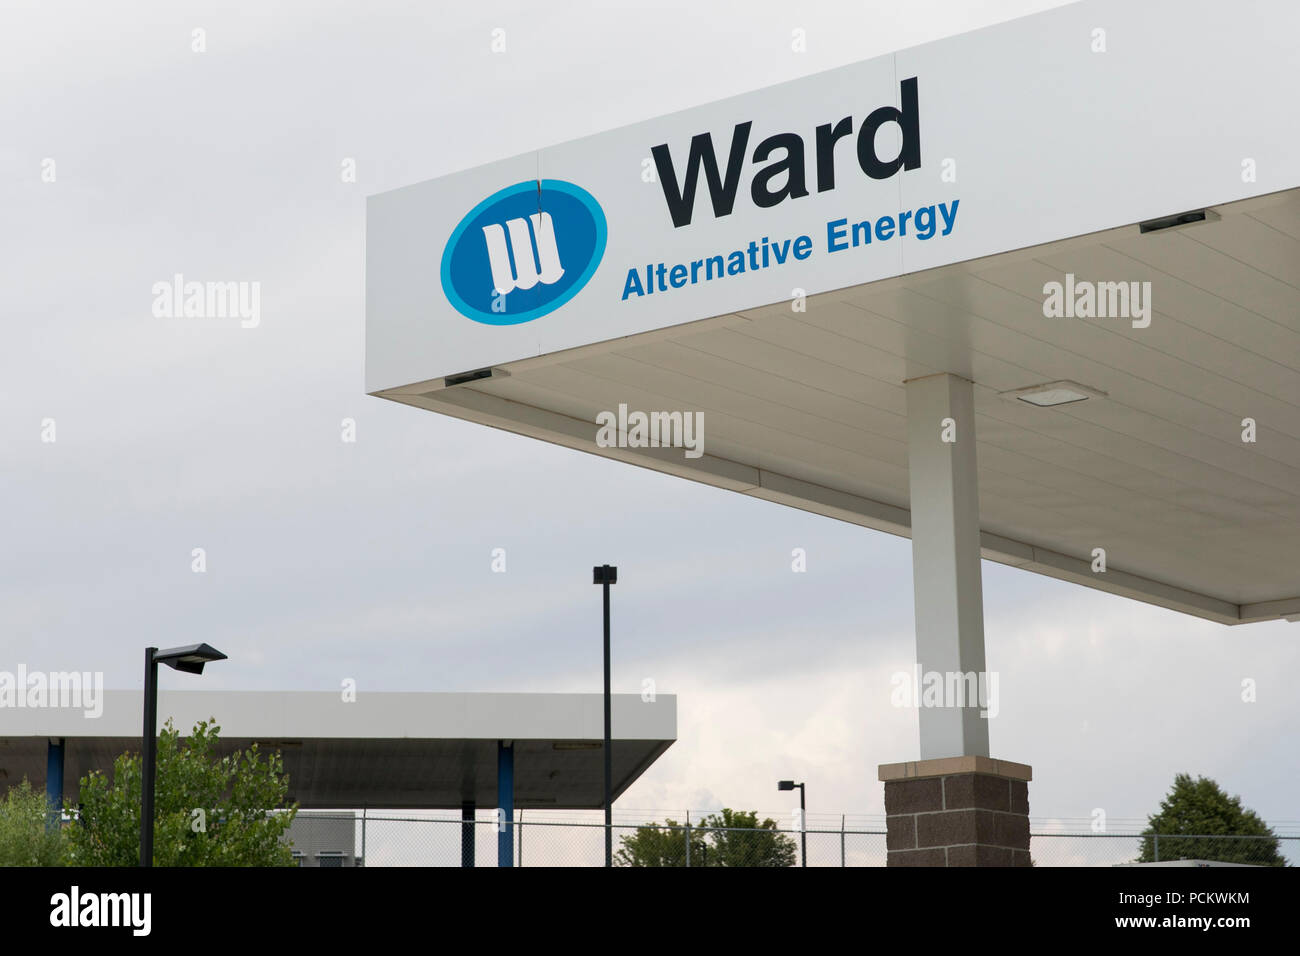 A logo sign outside of a X3Energy and Ward Alternative Energy natural gas fueling station in Greely, Colorado, on July 21, 2018. Stock Photo